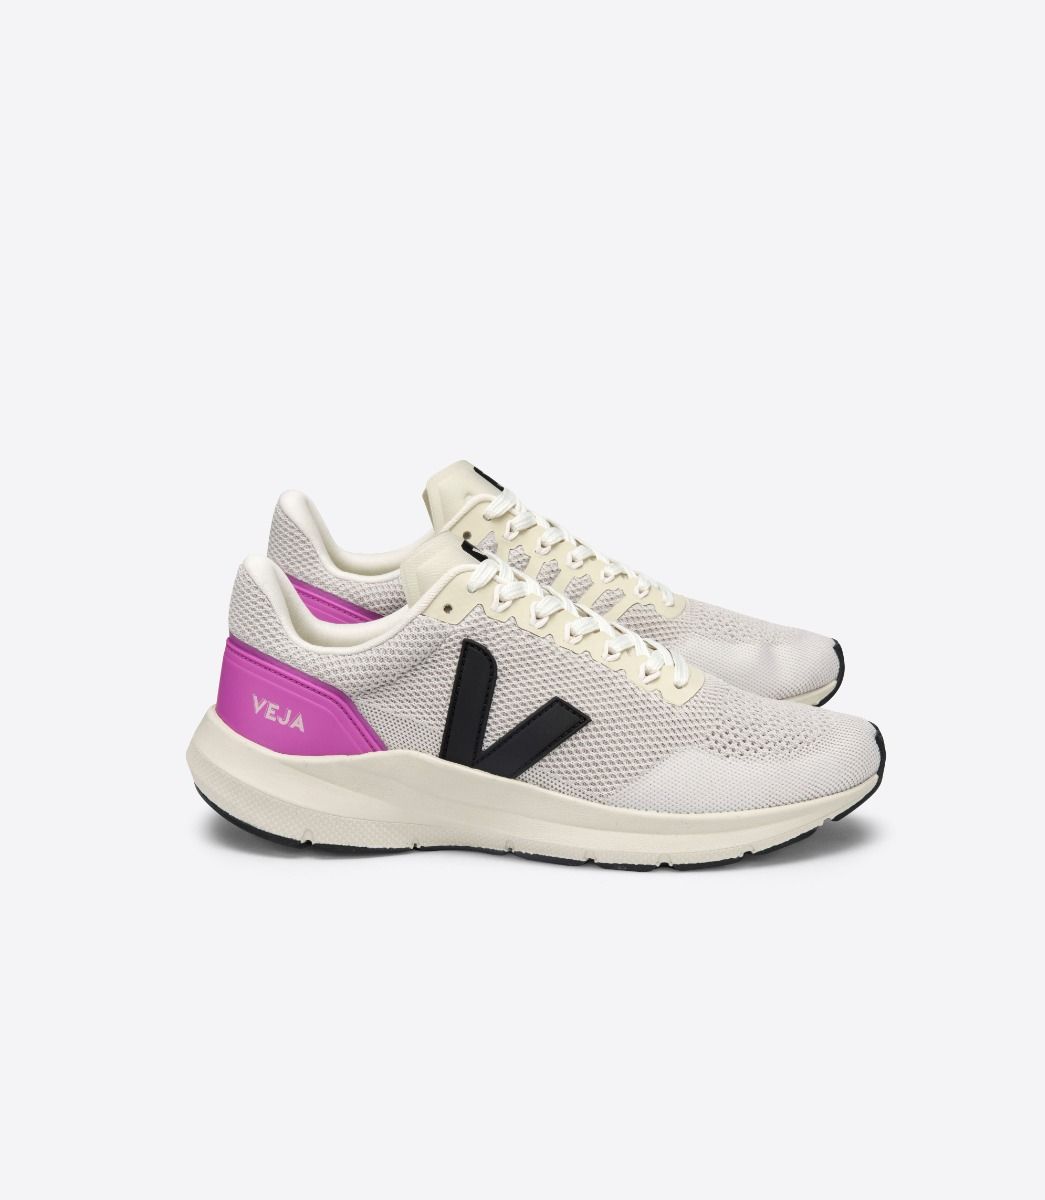 Named after one of the fastest and most athletic fishes in the ocean, the Women's Marlin from Veja is designed for those days when you have performance in mind. Light and dynamic yet comfortable for everyday users. The Marlin is about perpetual improvement in mind.